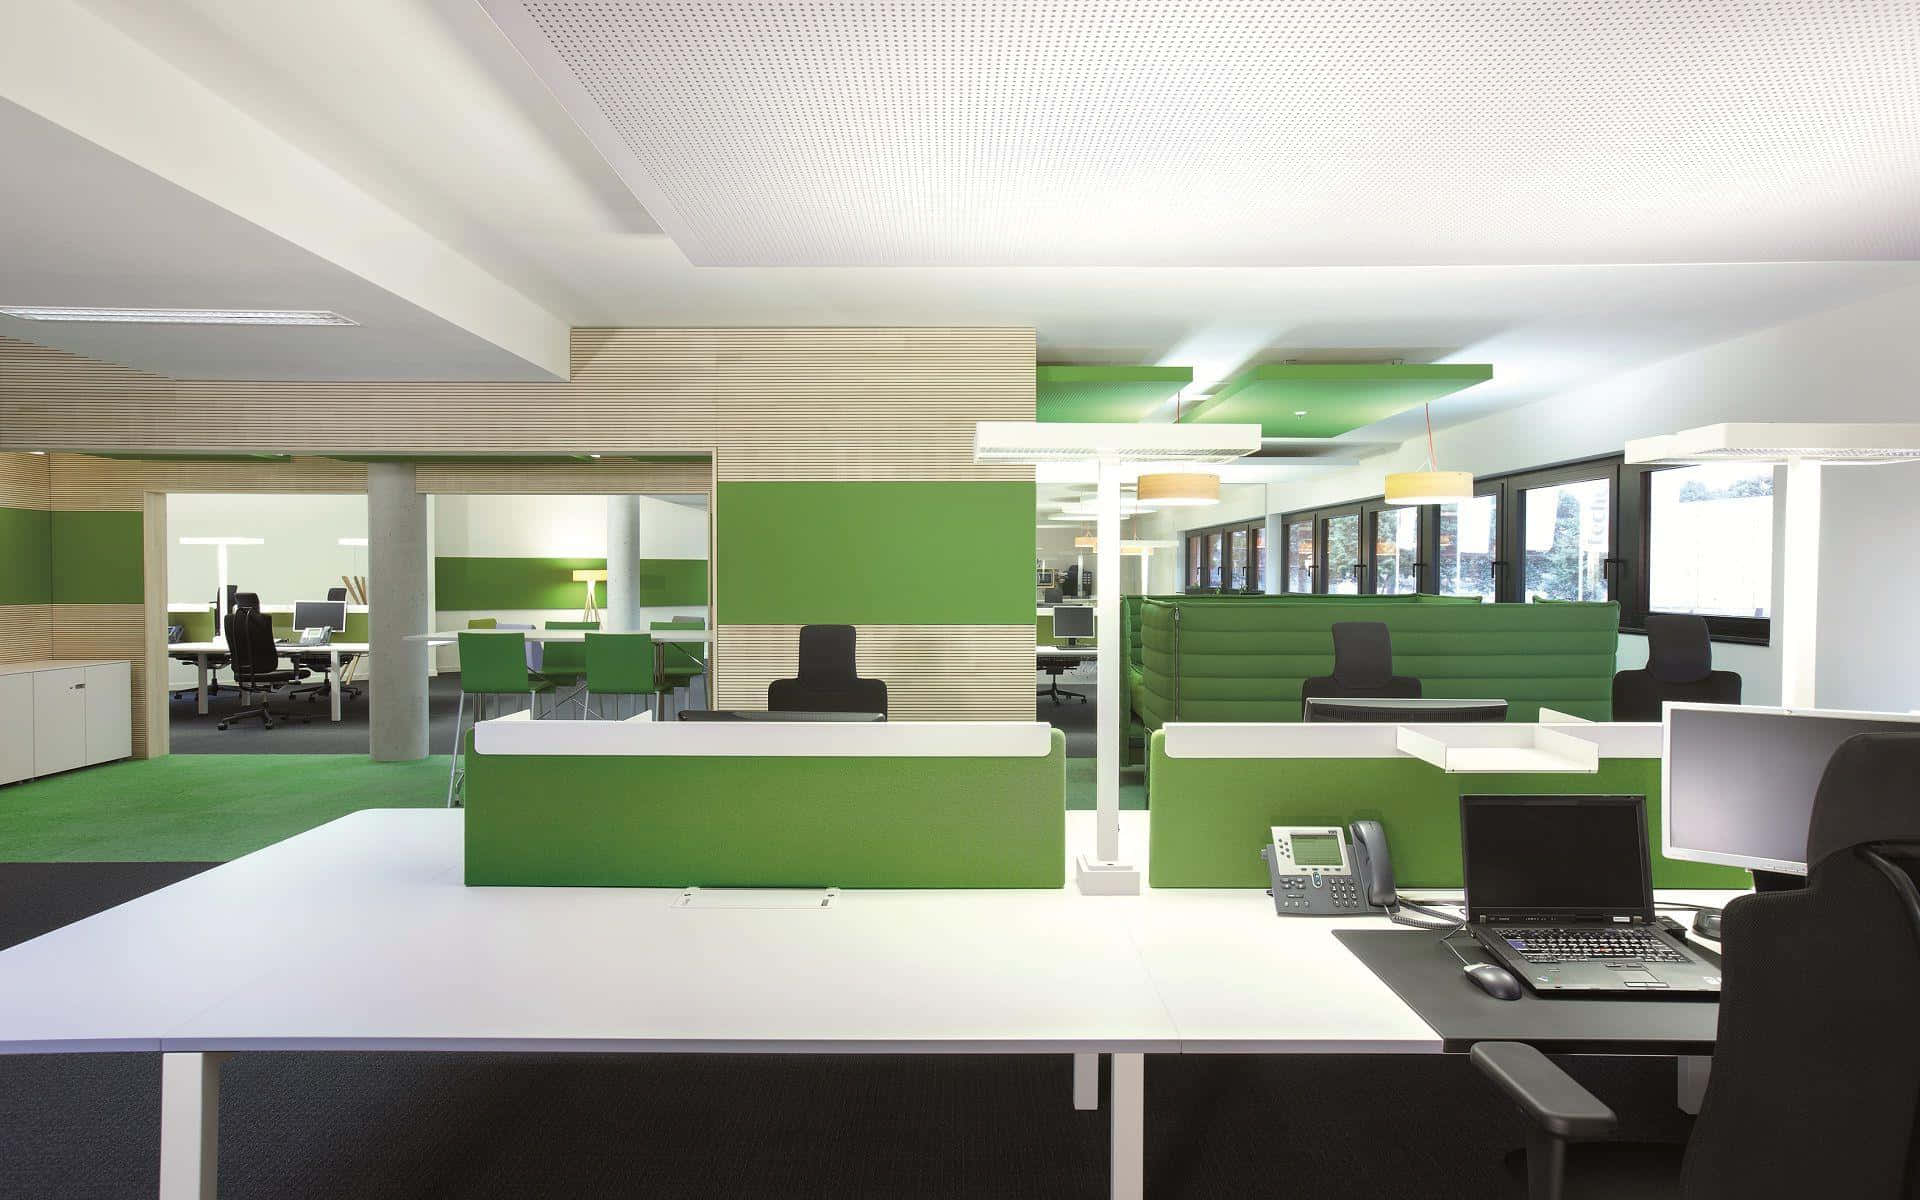 A Green And White Office With Desks And Chairs